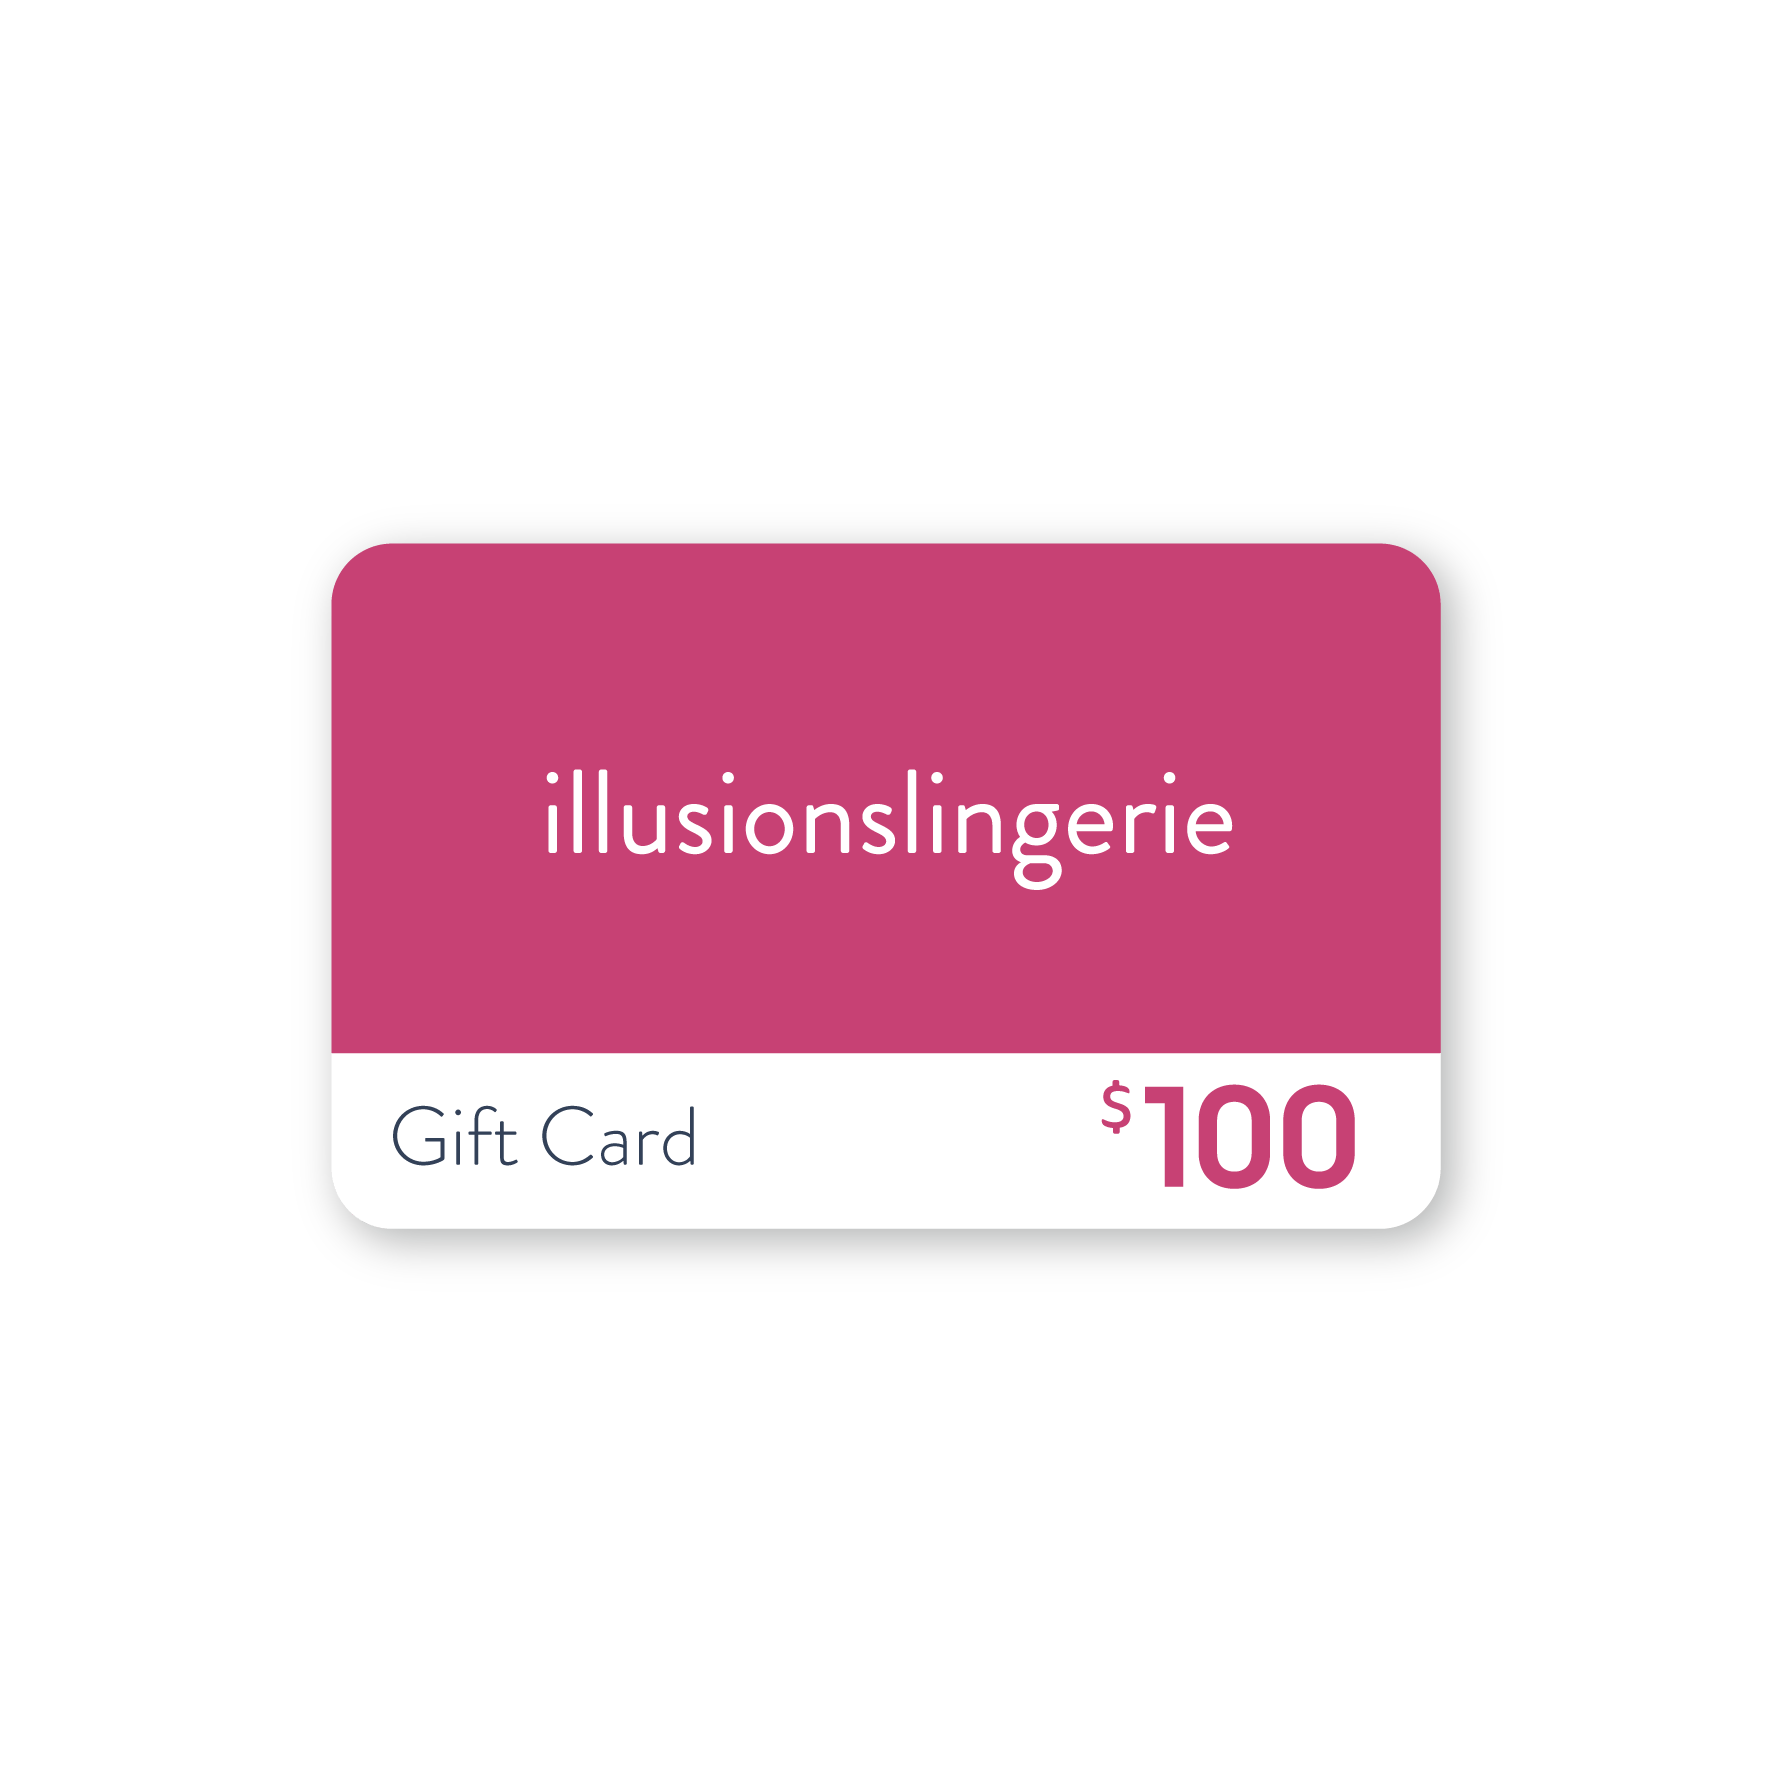 Illusions Lingerie Gift Card $100 Digital Gift Card - Illusions Lingerie from Illusions Lingerie in Melbourne